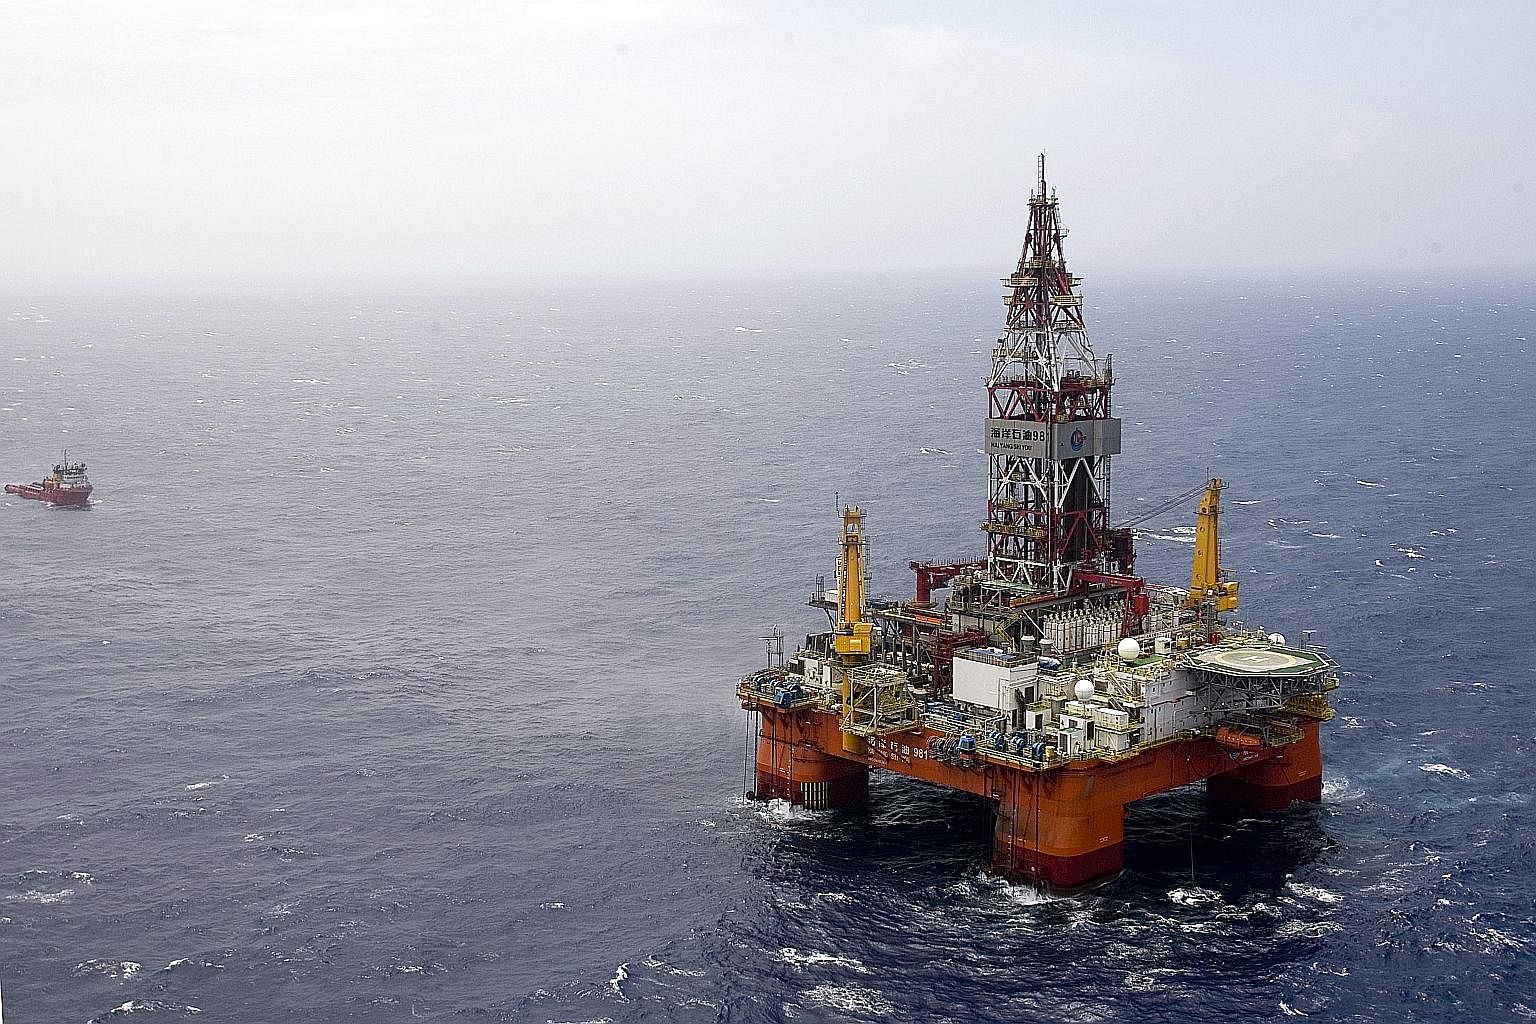 China has made tremendous strides in oil and gas exploration technology. The Haiyang Shiyou 981 (above) ranks among the important advancements it has made.